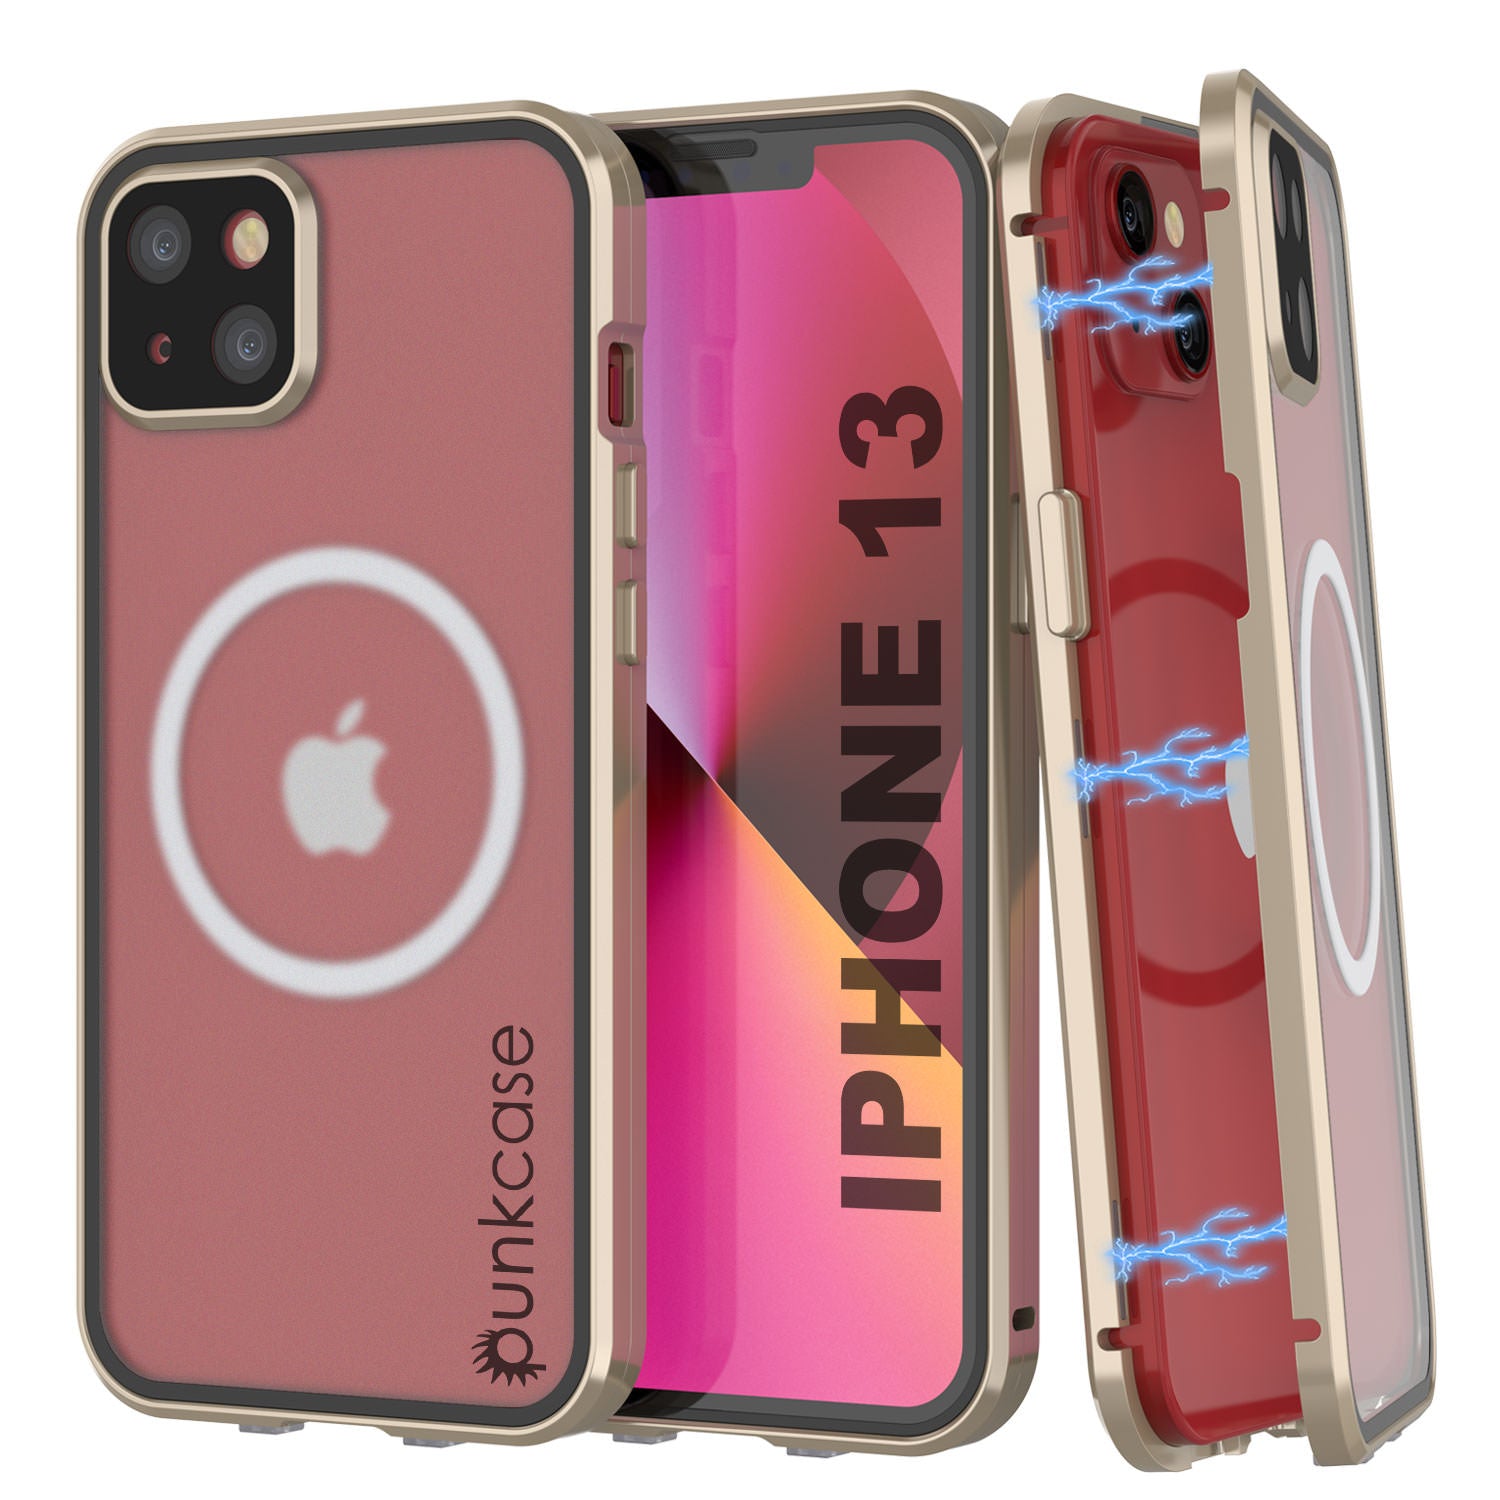 Punkcase iPhone 8+ Plus Reflector Case Protective Flip Cover [Rose